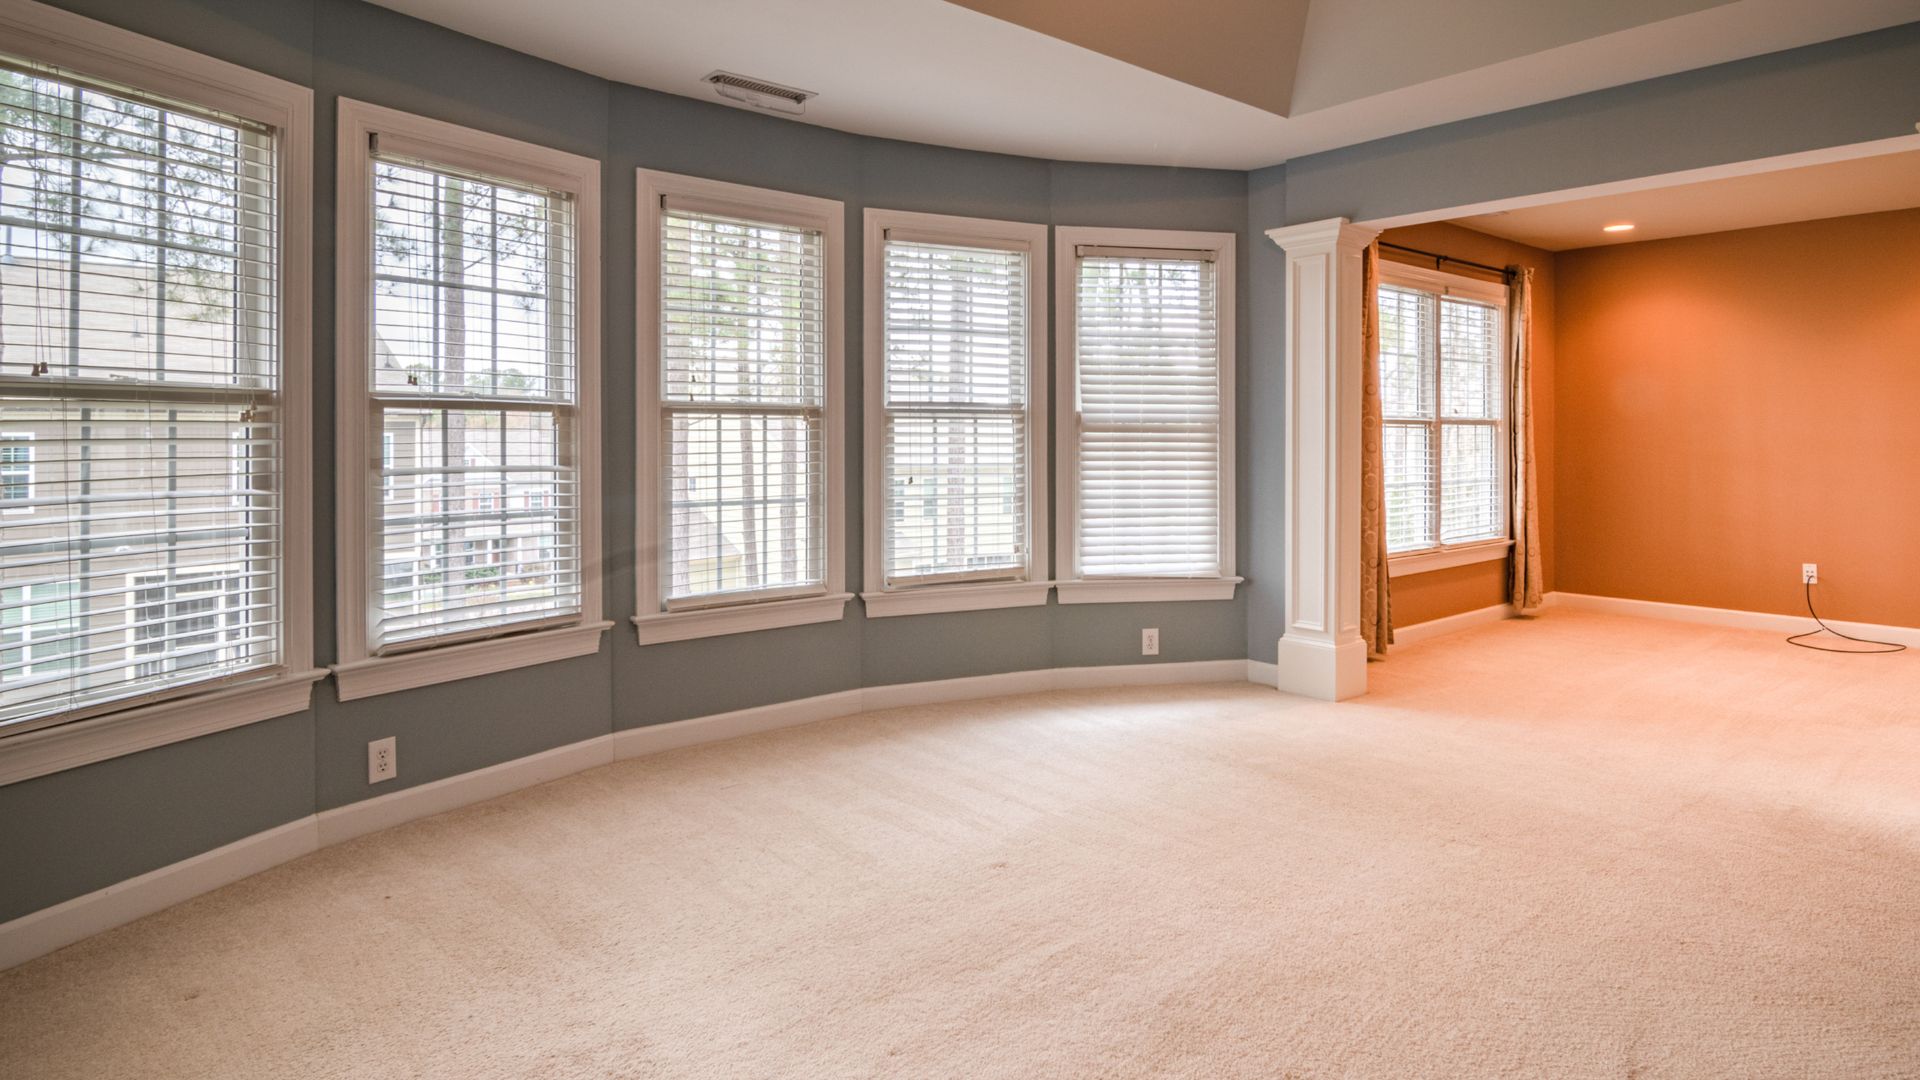 Living Room with Plenty Windows and Carpeted Floor